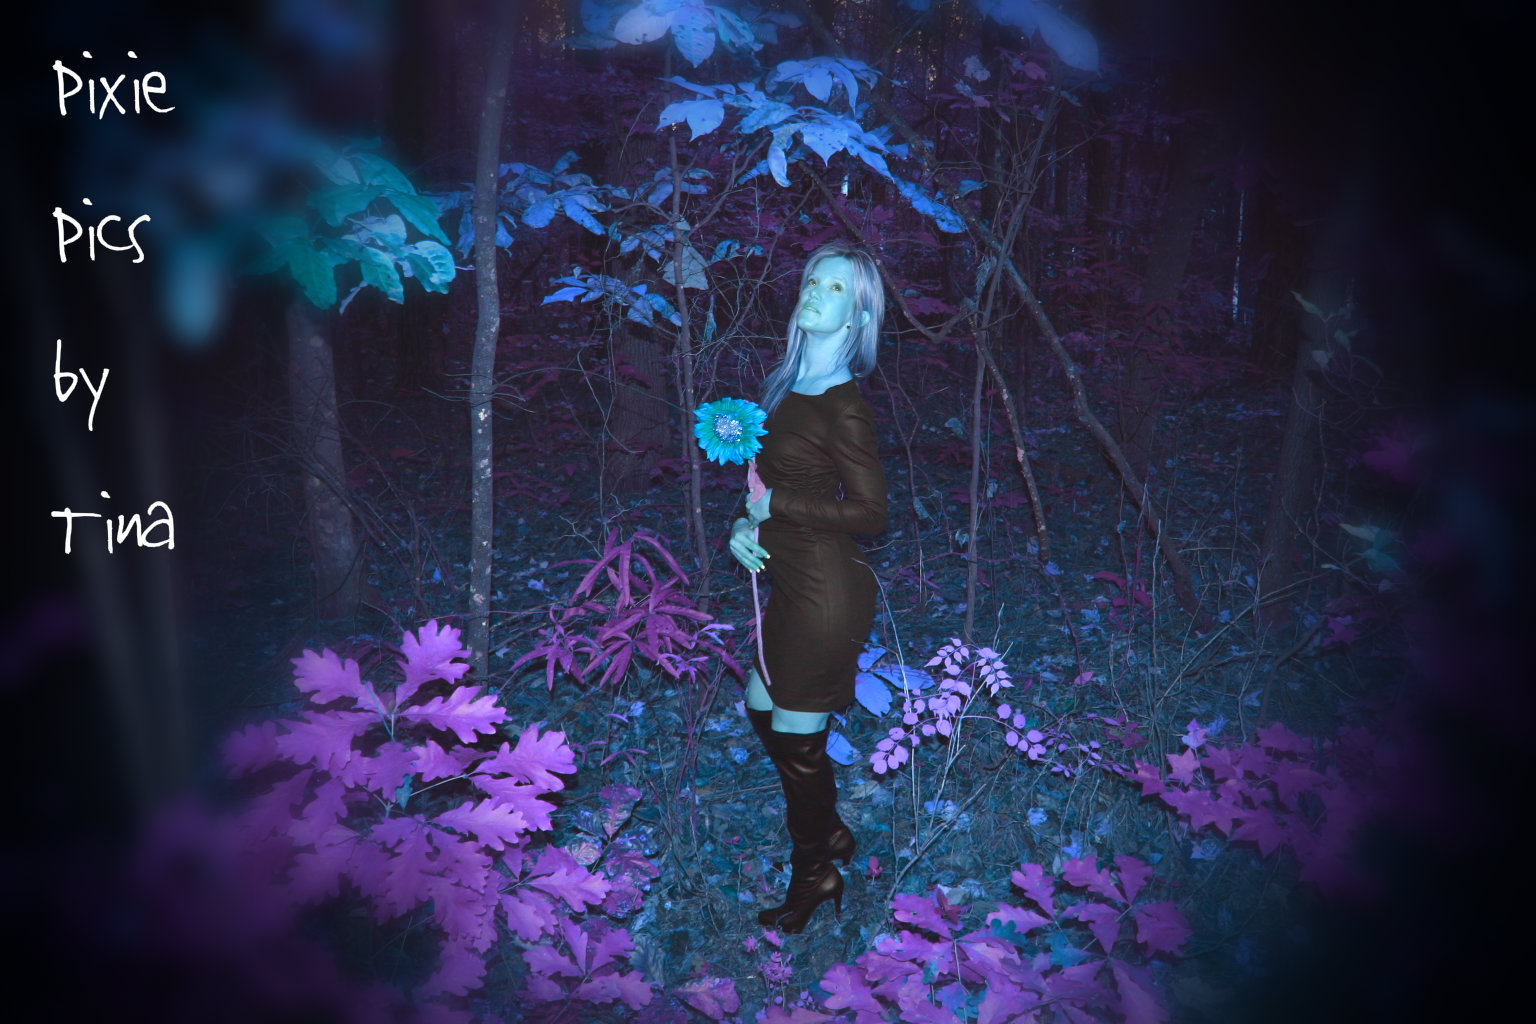 A fairy in the woods